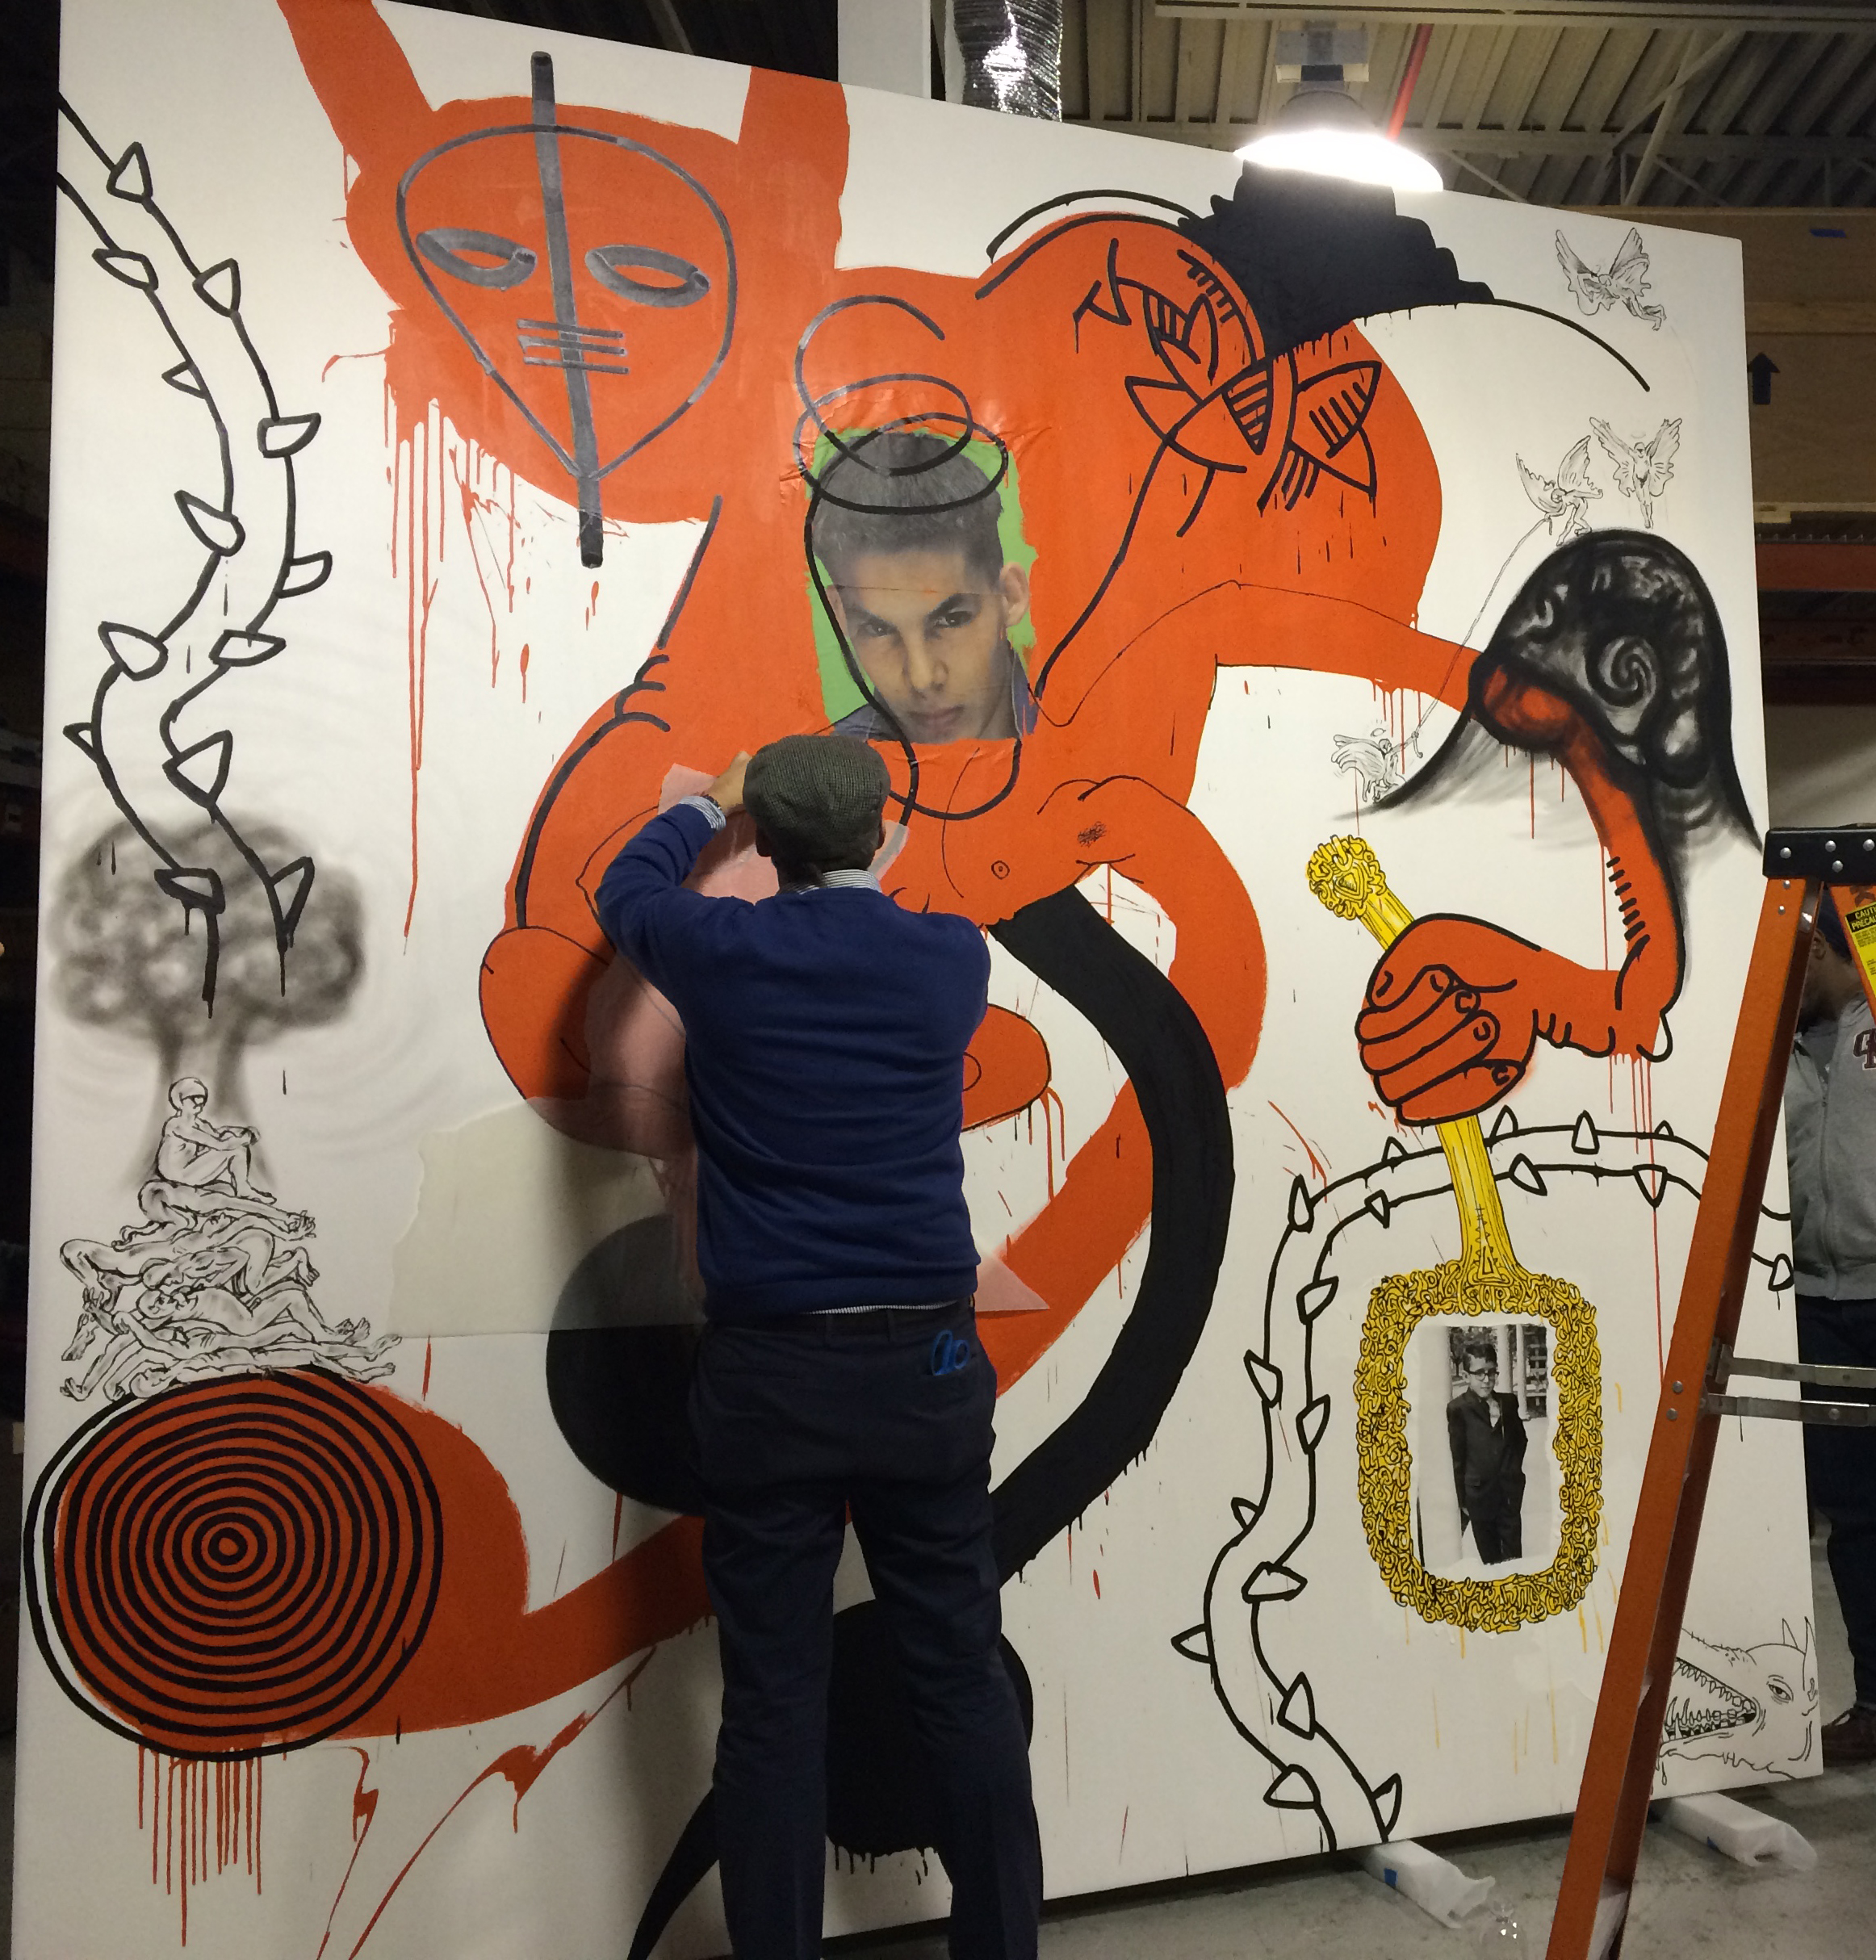 Preparing a rarely seen painting for exhibition in Munich | Haring ...